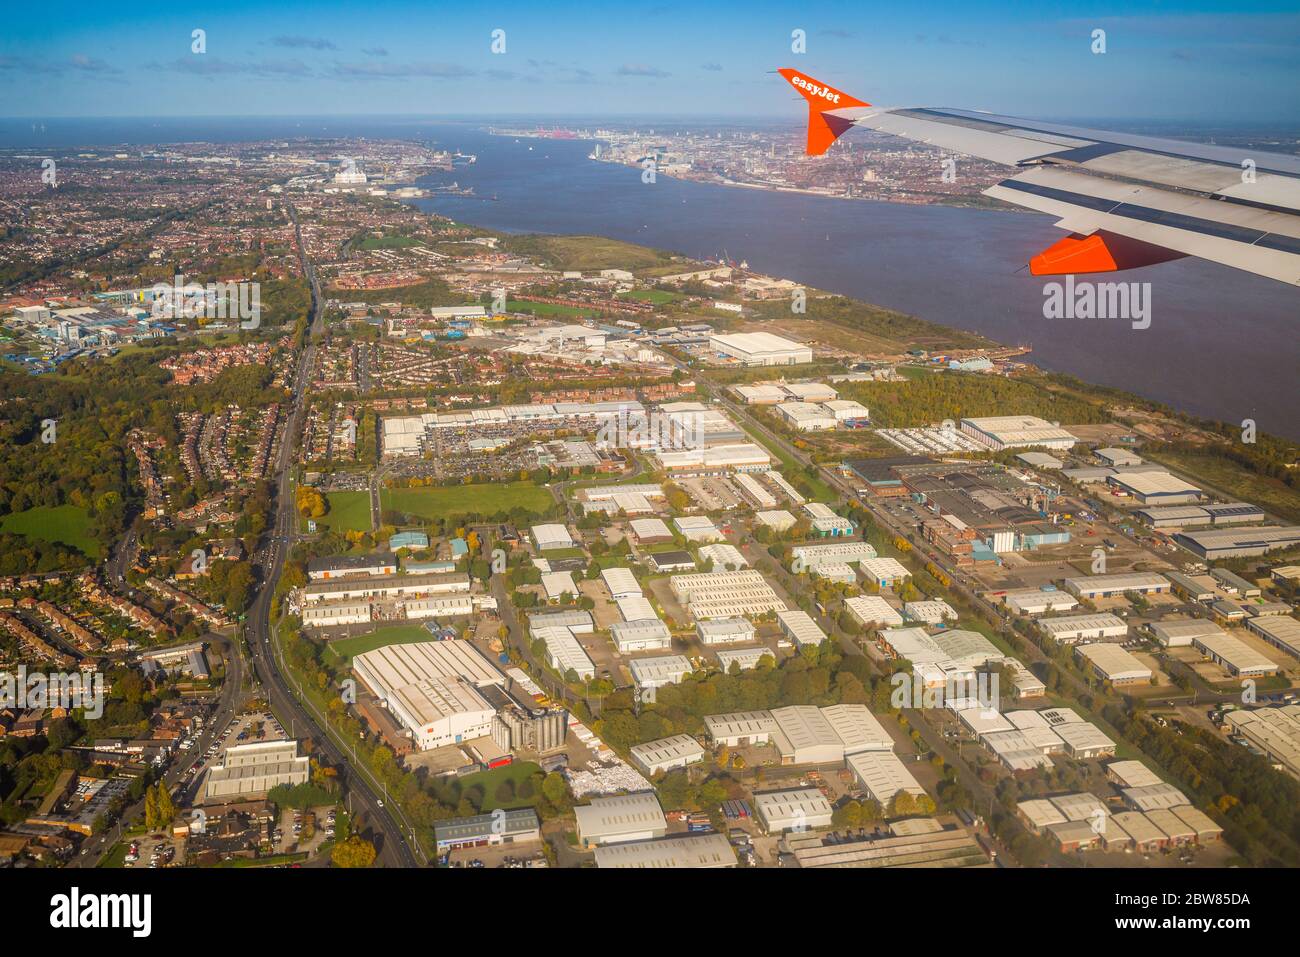 easy jet plane flying in over River Mersey to Liverpool John lennon airport, Merseyside, Liverpool, England,UK Stock Photo